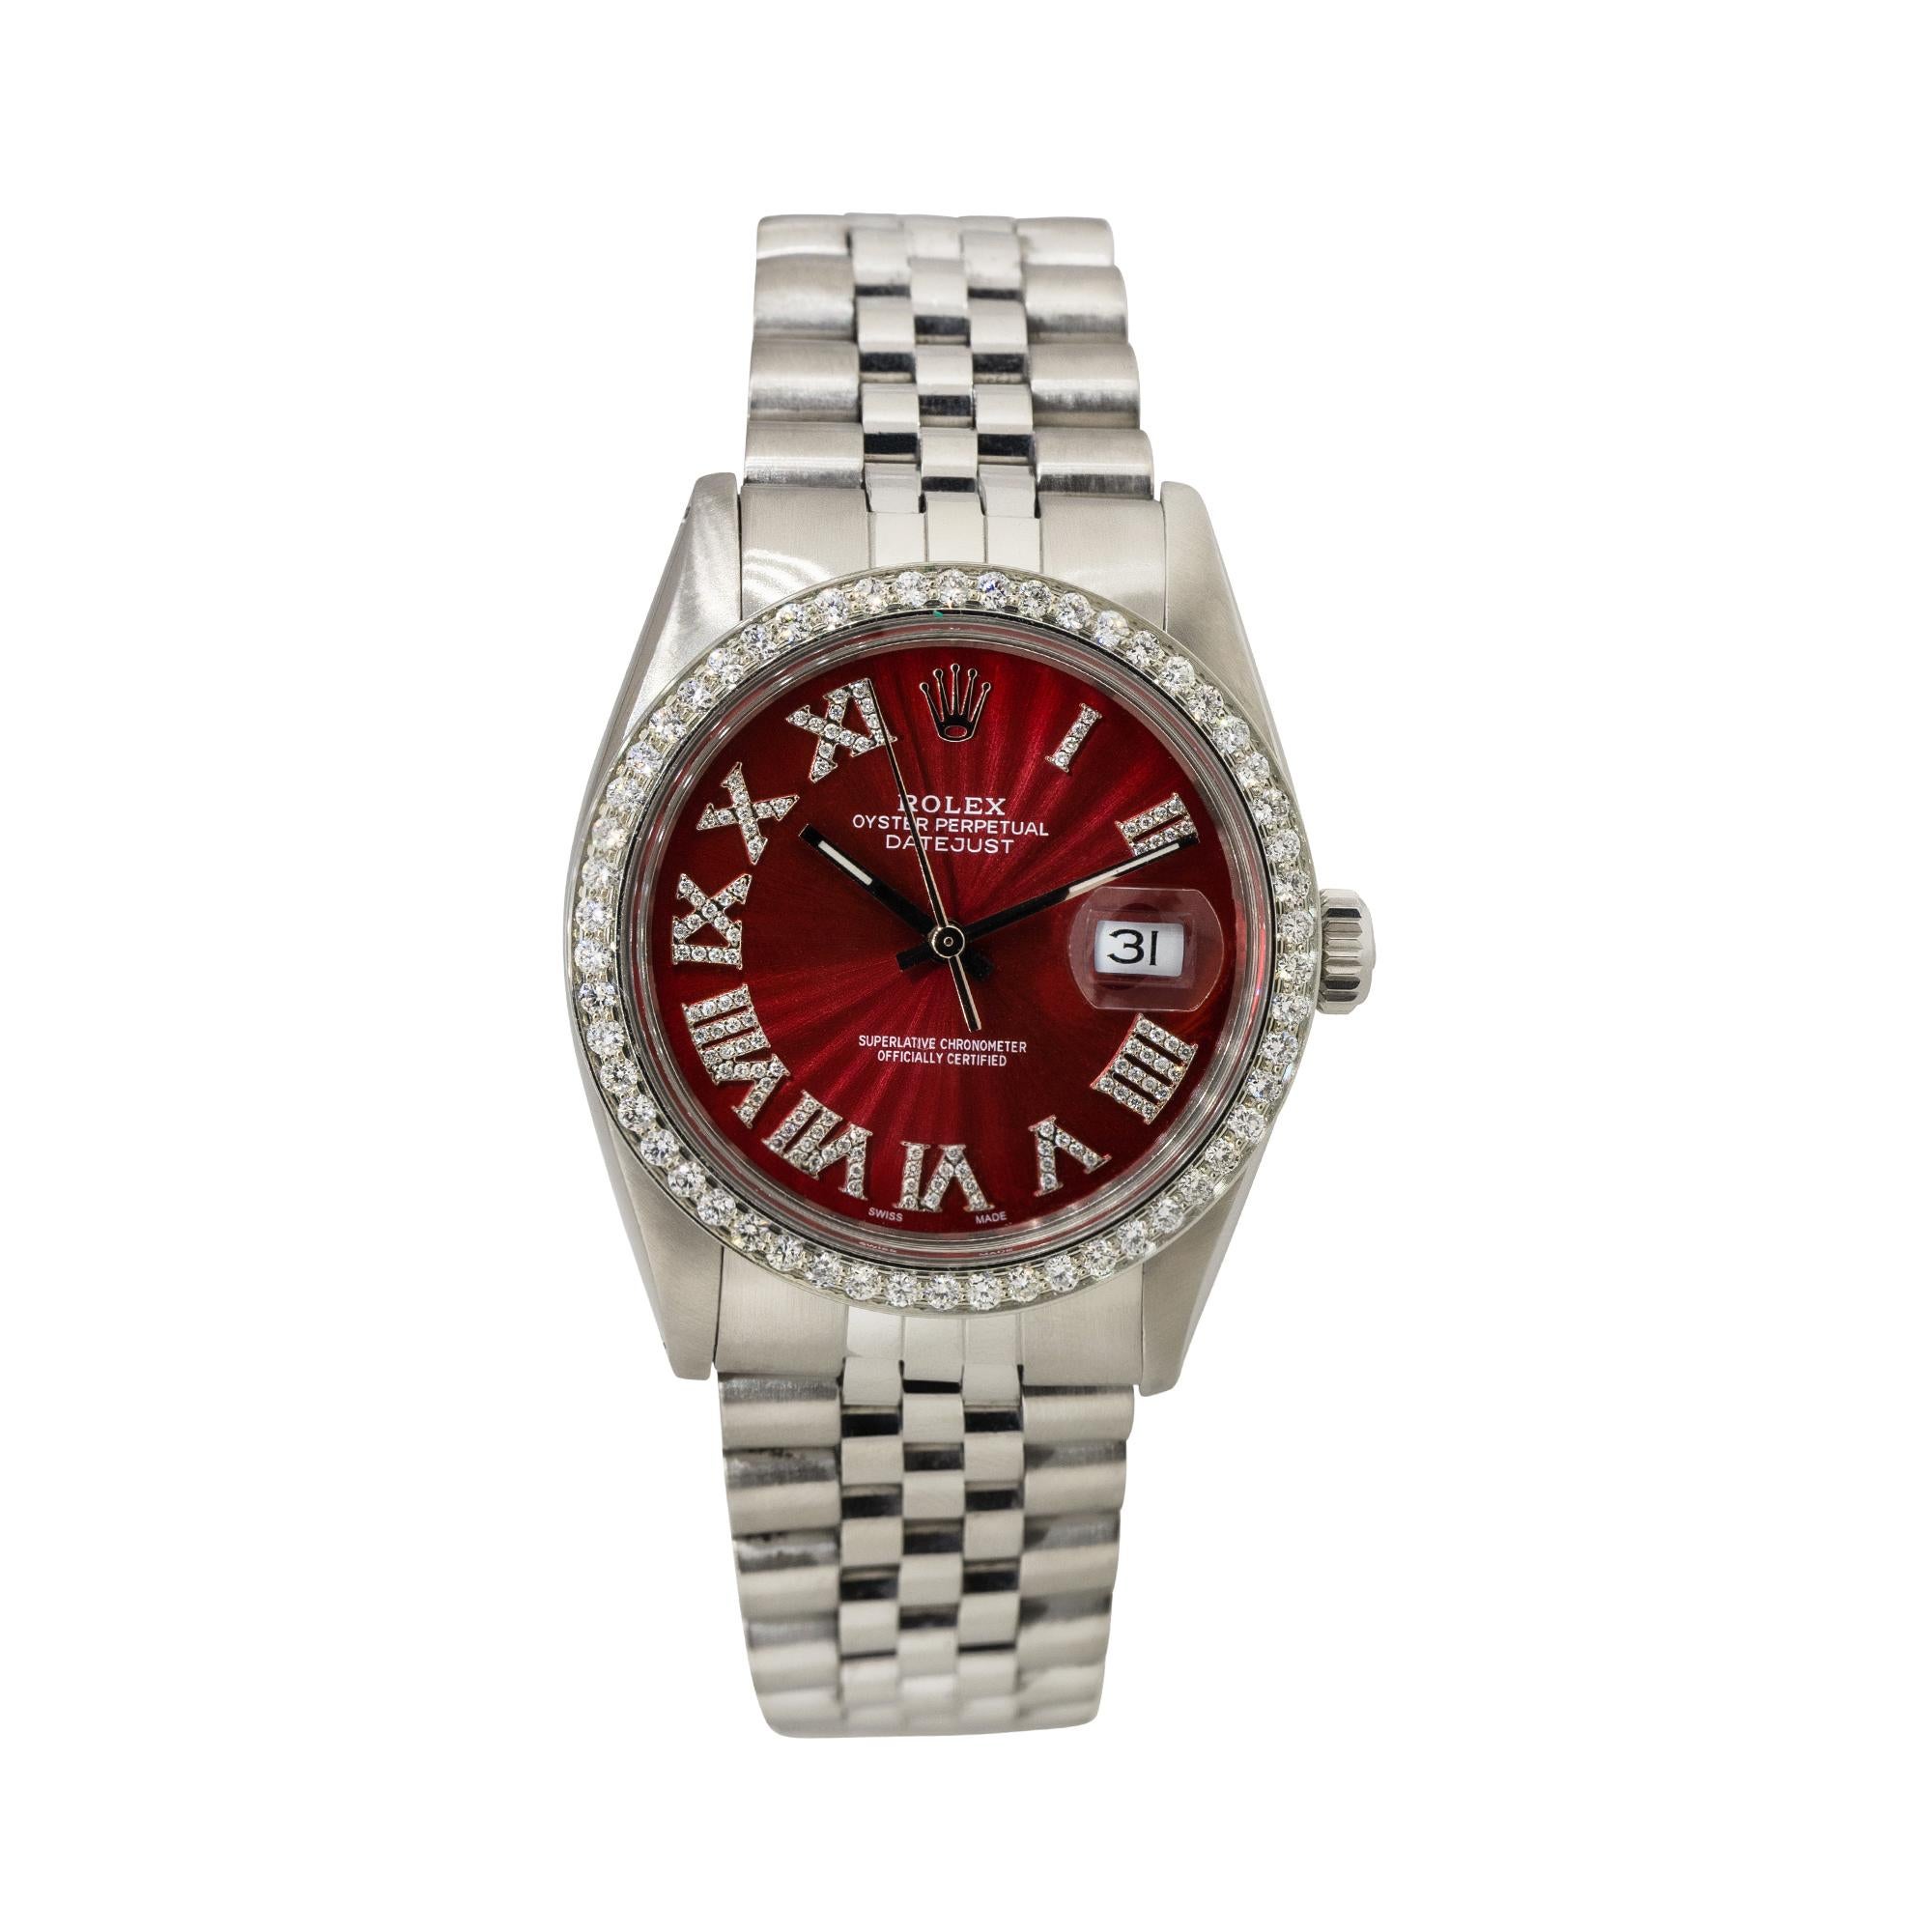 Rolex 16030 Datejust 36mm Stainless Steel Red Diamond Dial Watch
The Rolex 16030 Datejust with a red diamond dial offers a bold and distinctive design that appeals to those seeking a standout and stylish timepiece. The combination of stainless steel